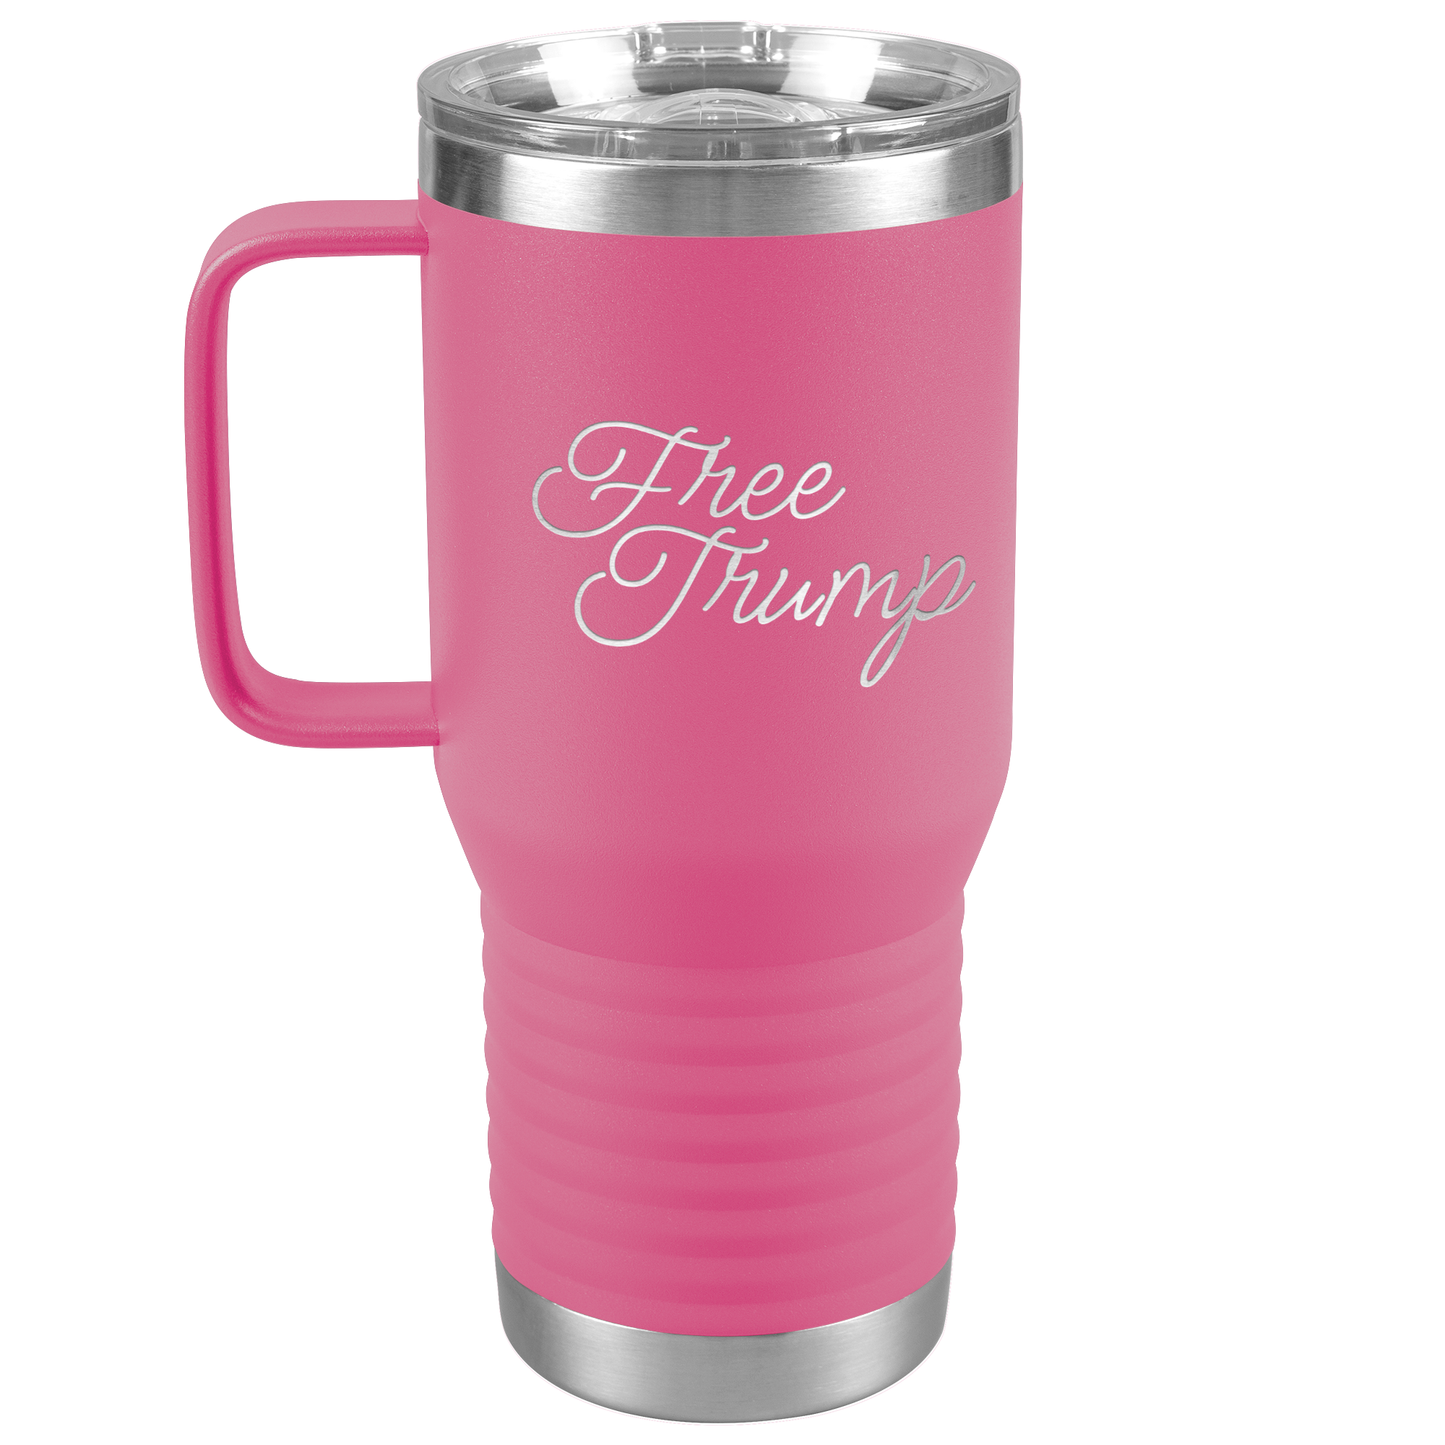 Get trendy with Free Trump 20oz Travel Tumbler -  available at Good Gift Company. Grab yours for $25 today!